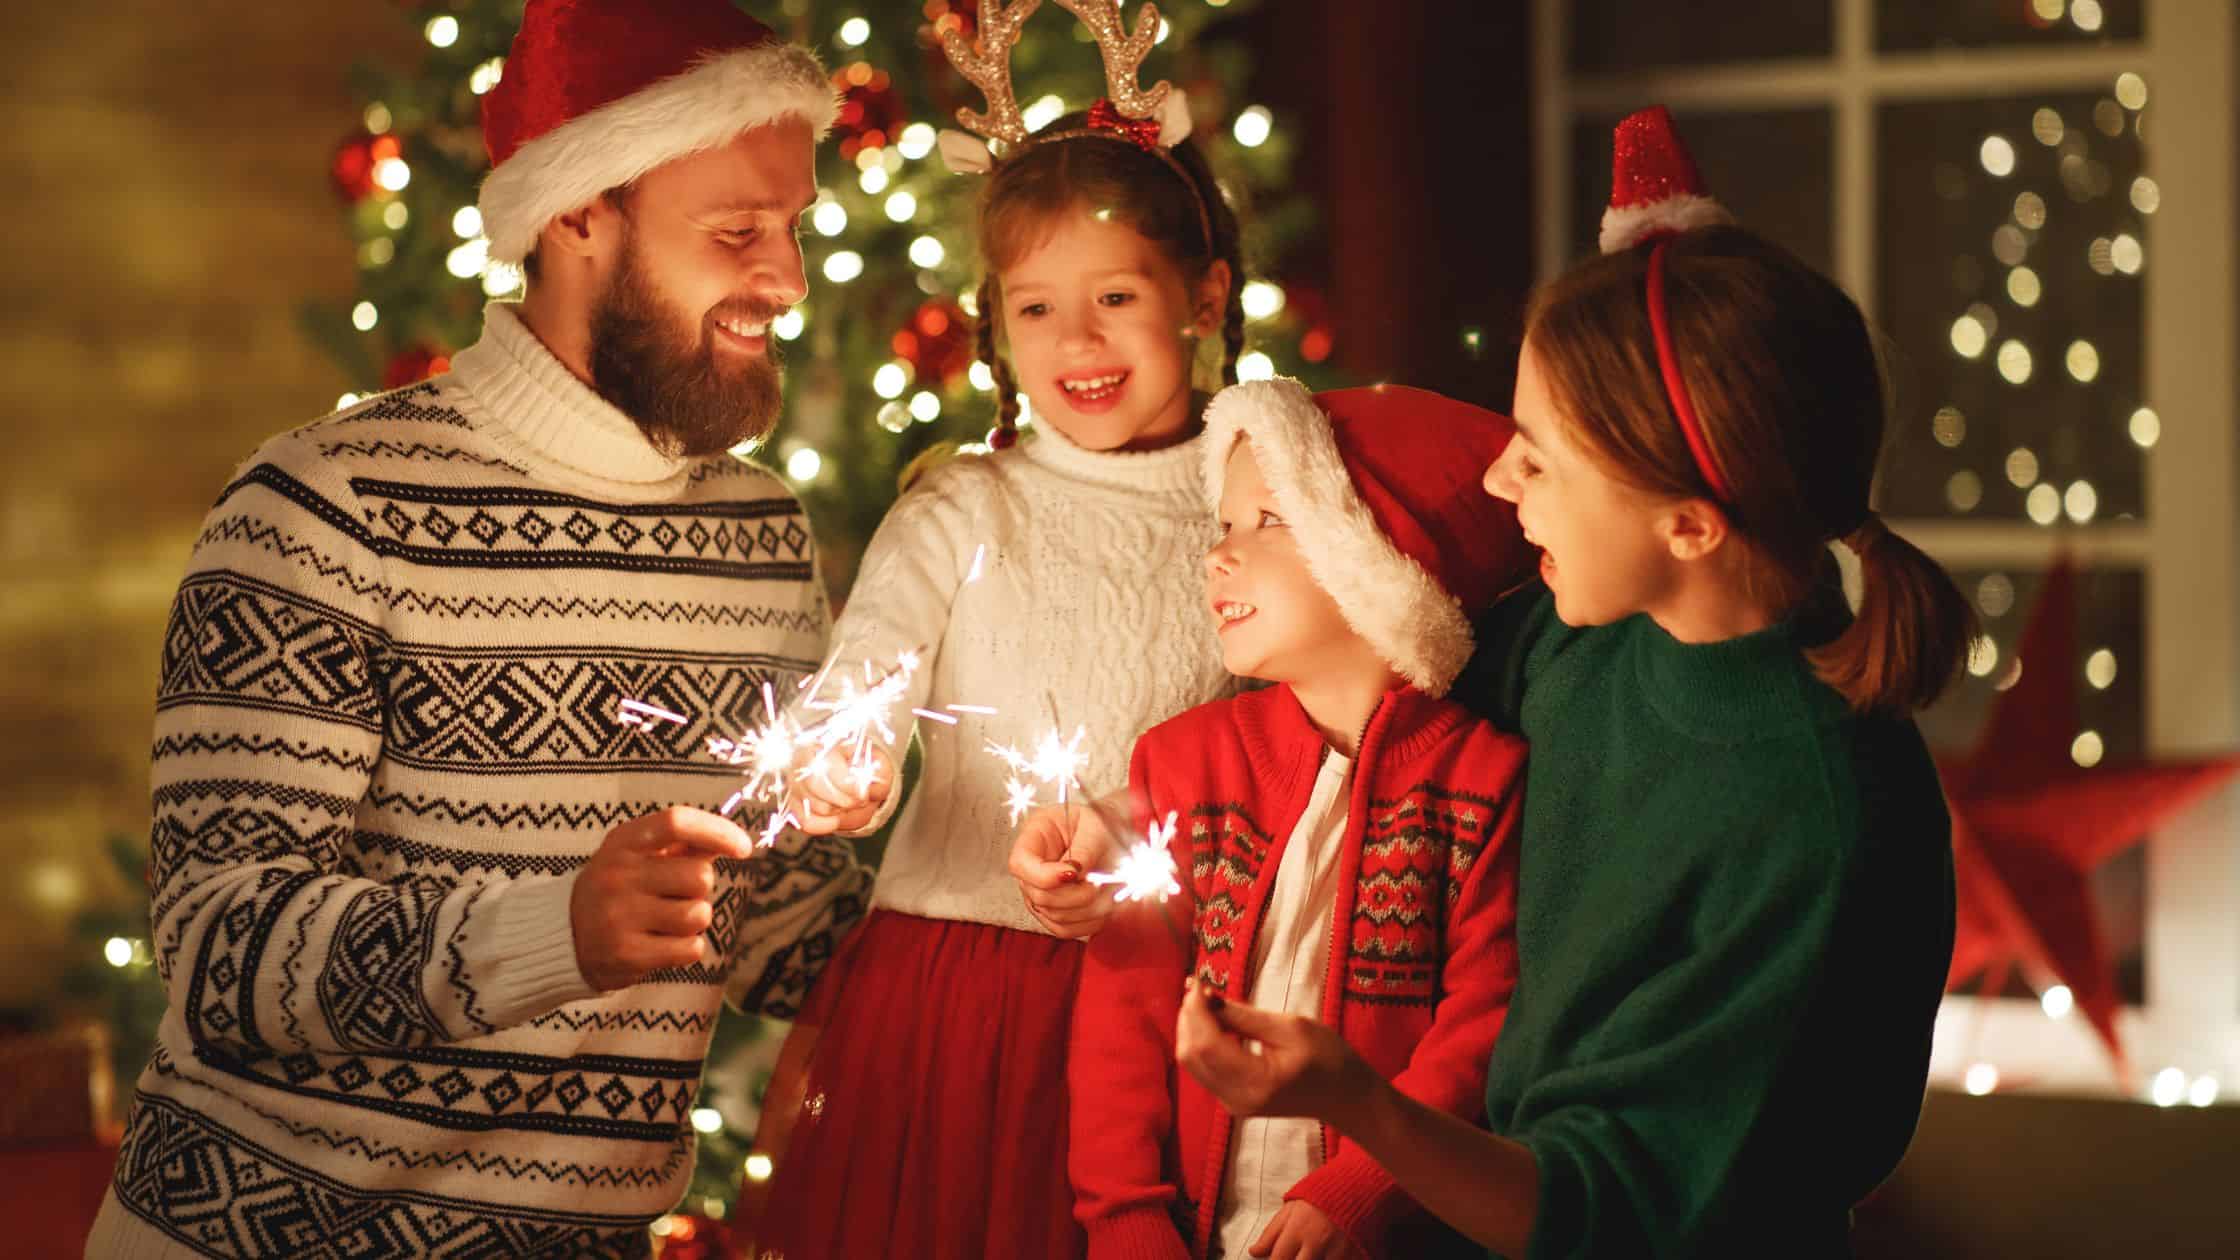 18 Heartfelt Christmas Traditions That Keep Christ in Christmas